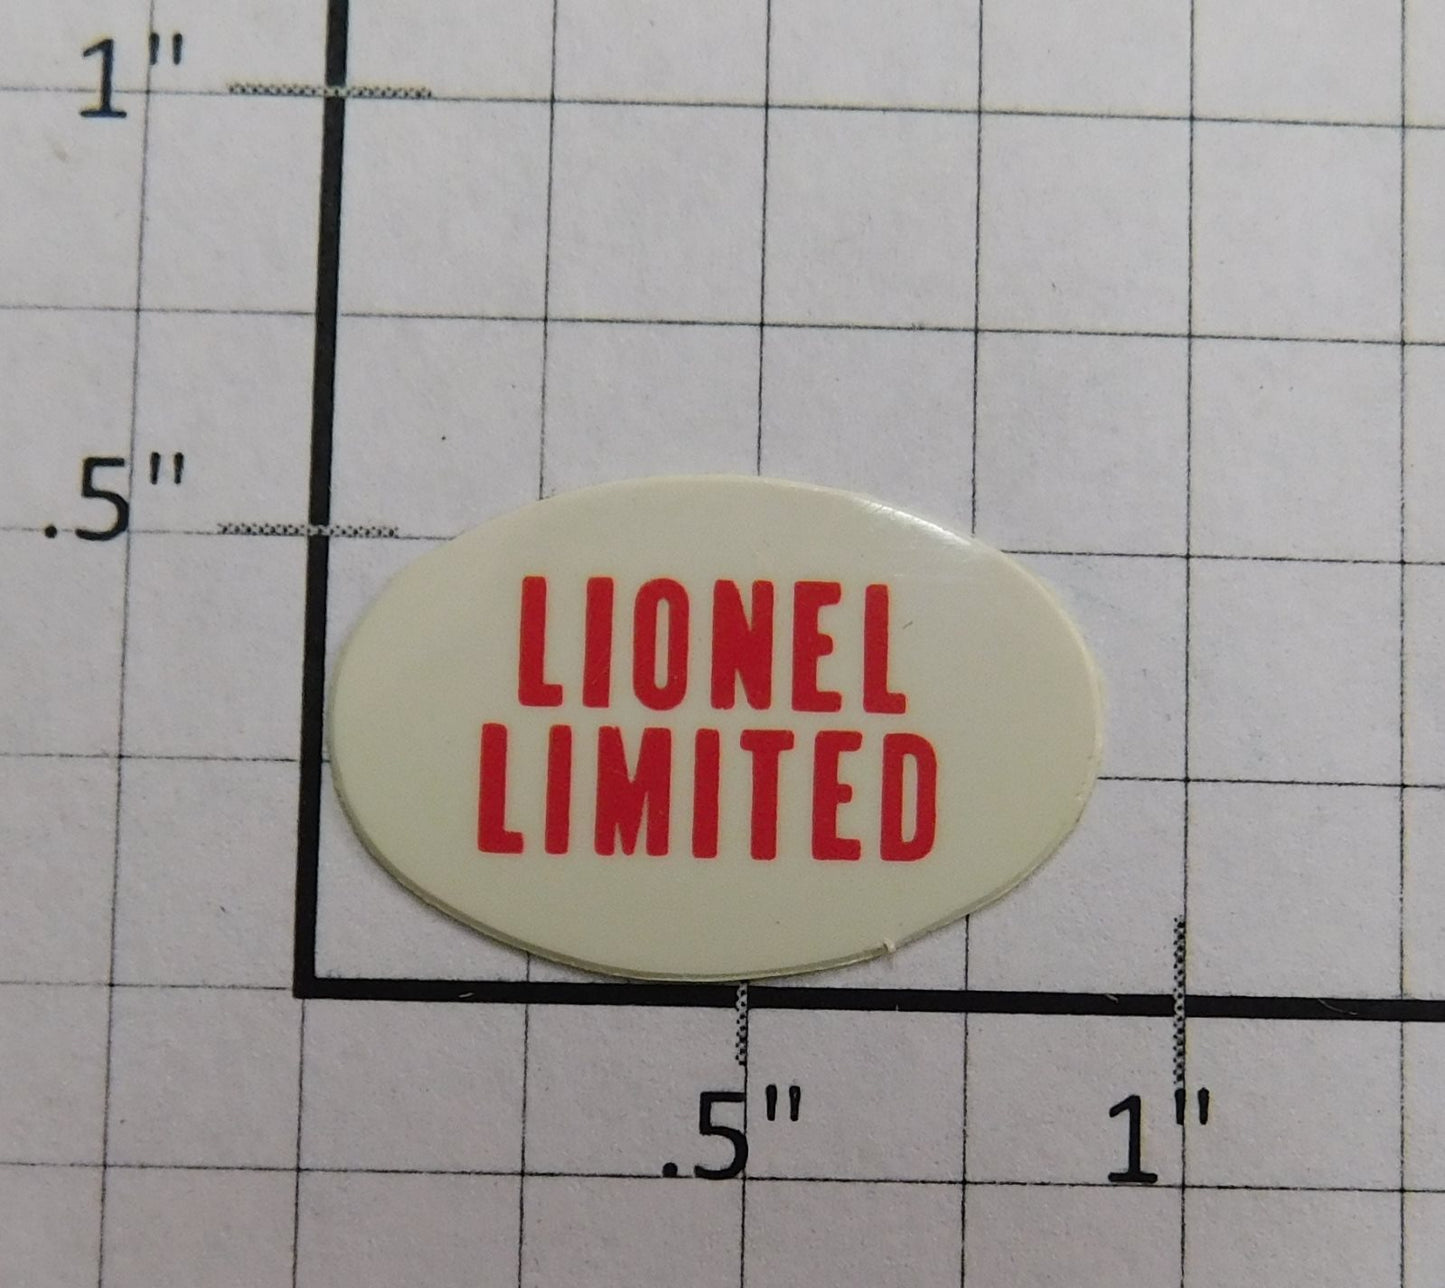 Lionel 341-10 Lionel Limited Observation Car Oval Drumhead Sign